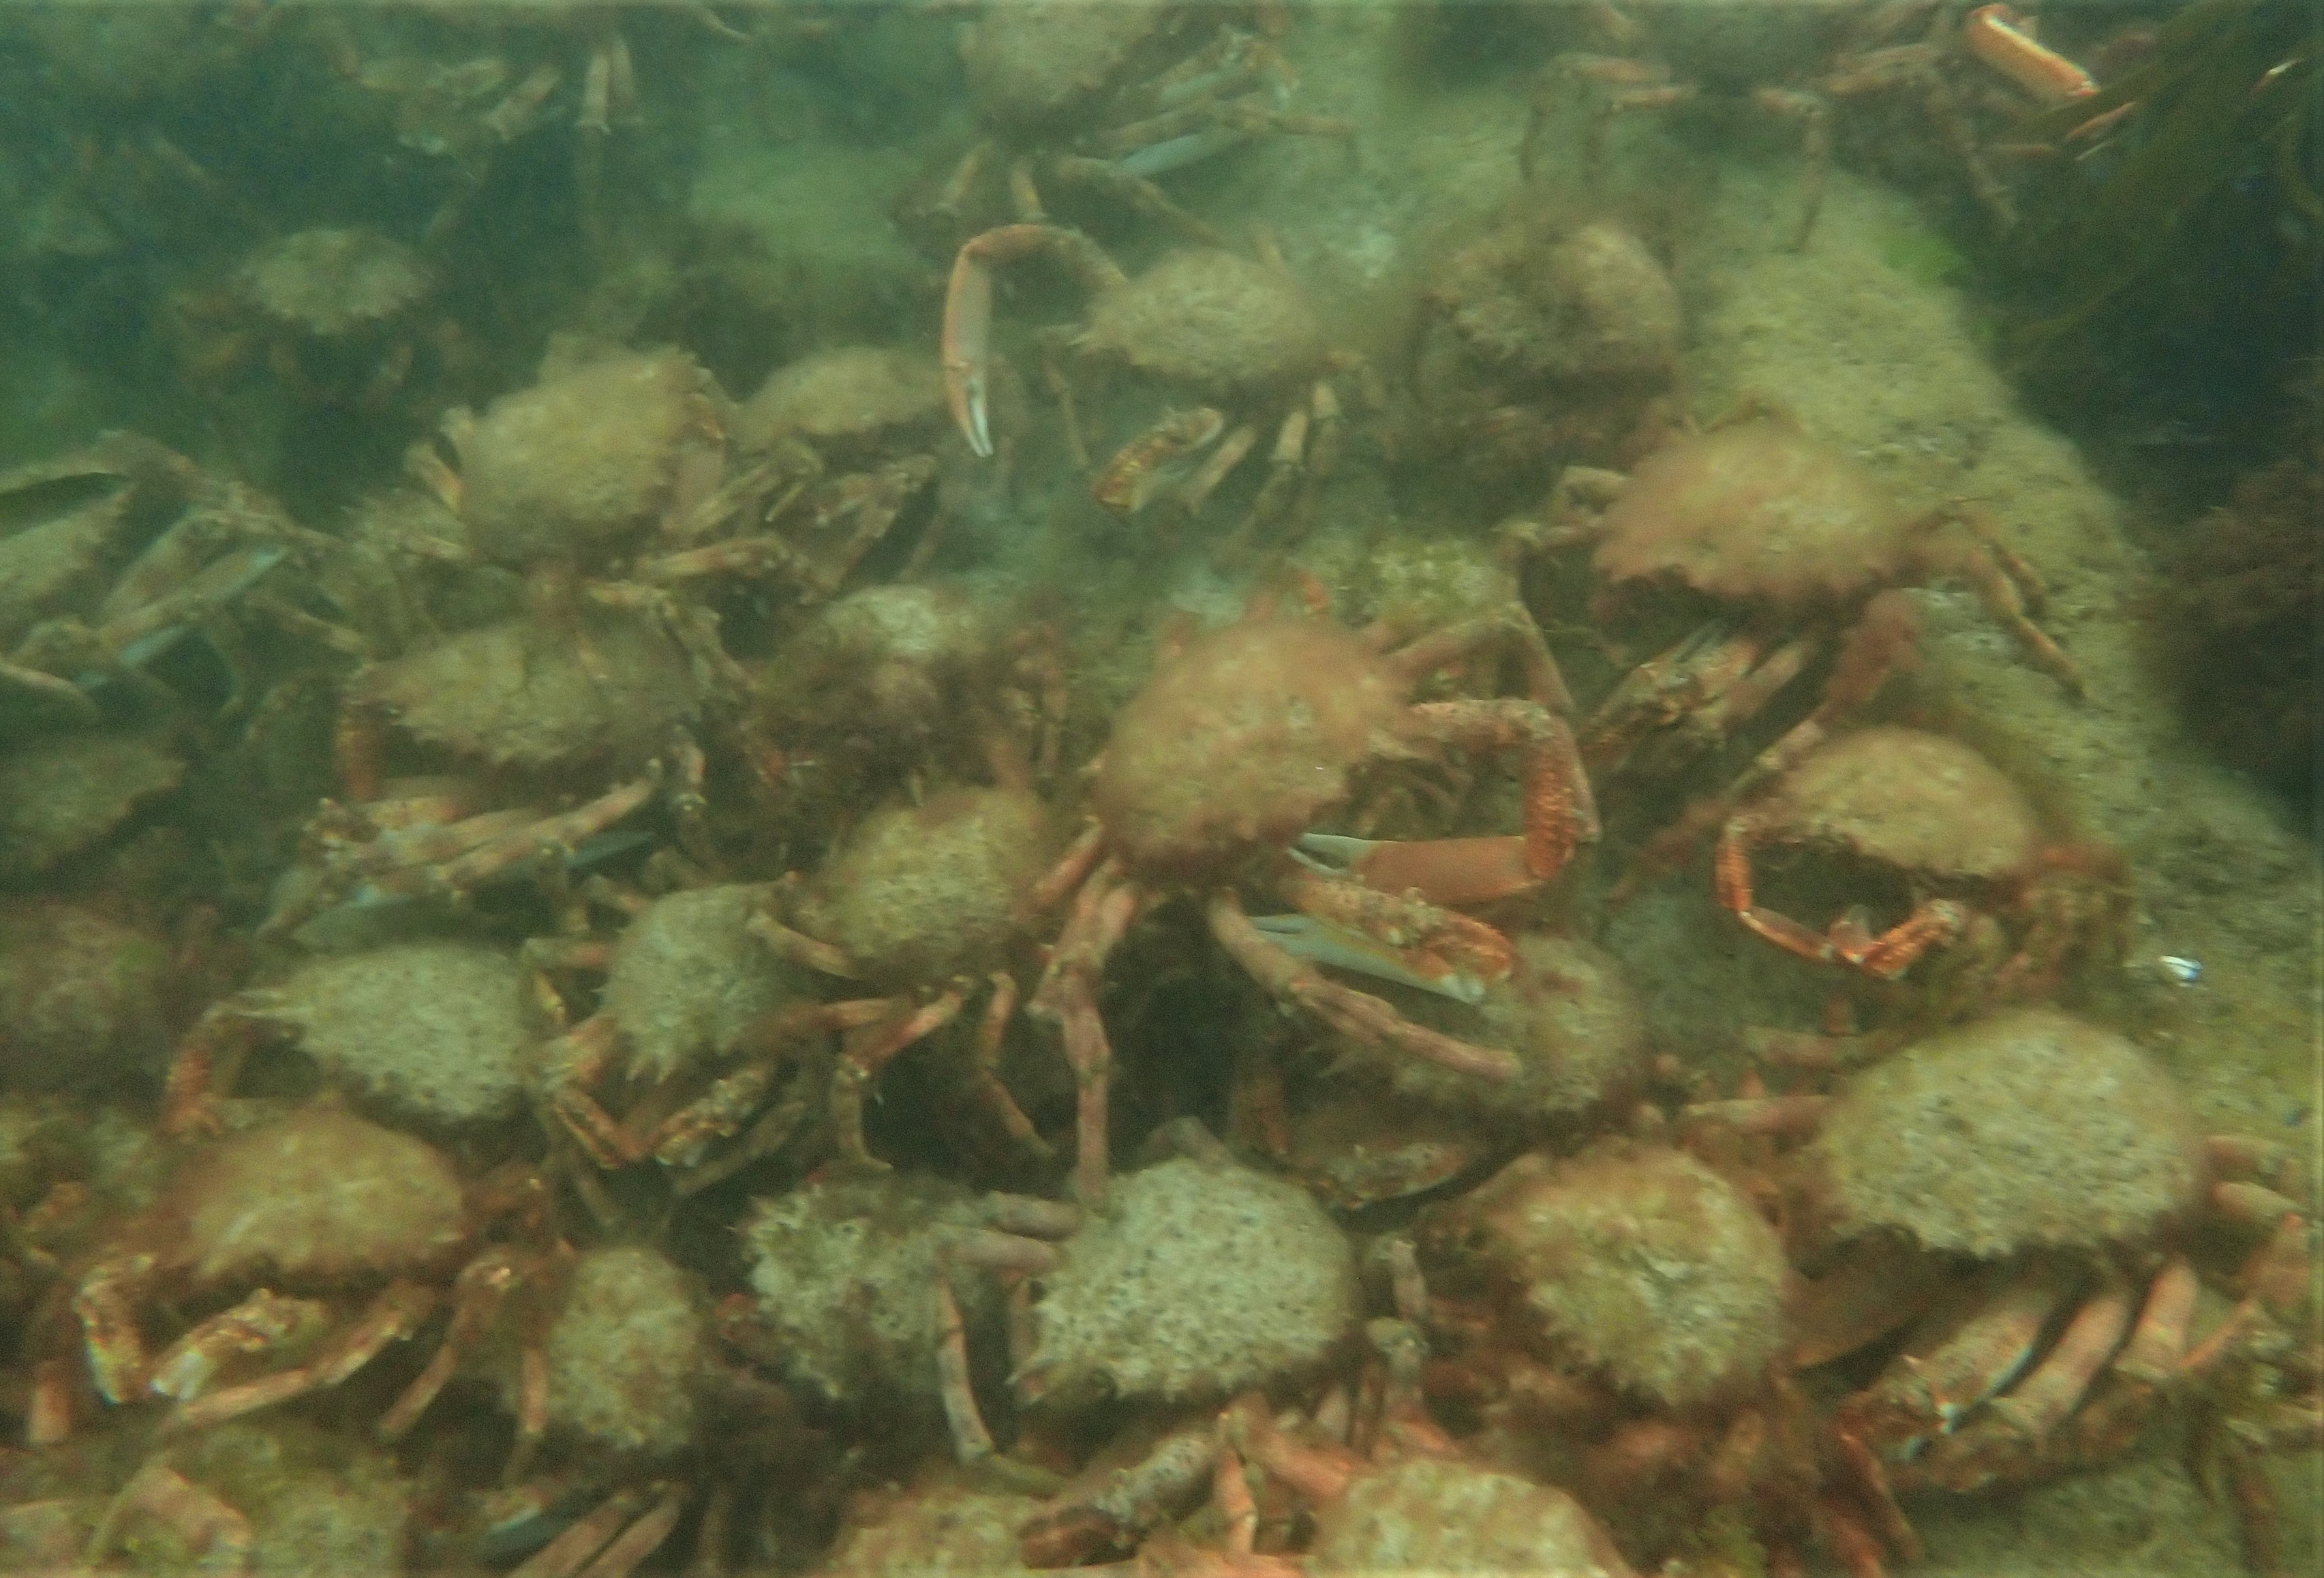 This undersea spectacle, which takes place annually between late summer and early autumn, involves crabs rallying together to protect themselves from the threat of predators (Matt Slater/Cornwall Wildlife Trust/PA).